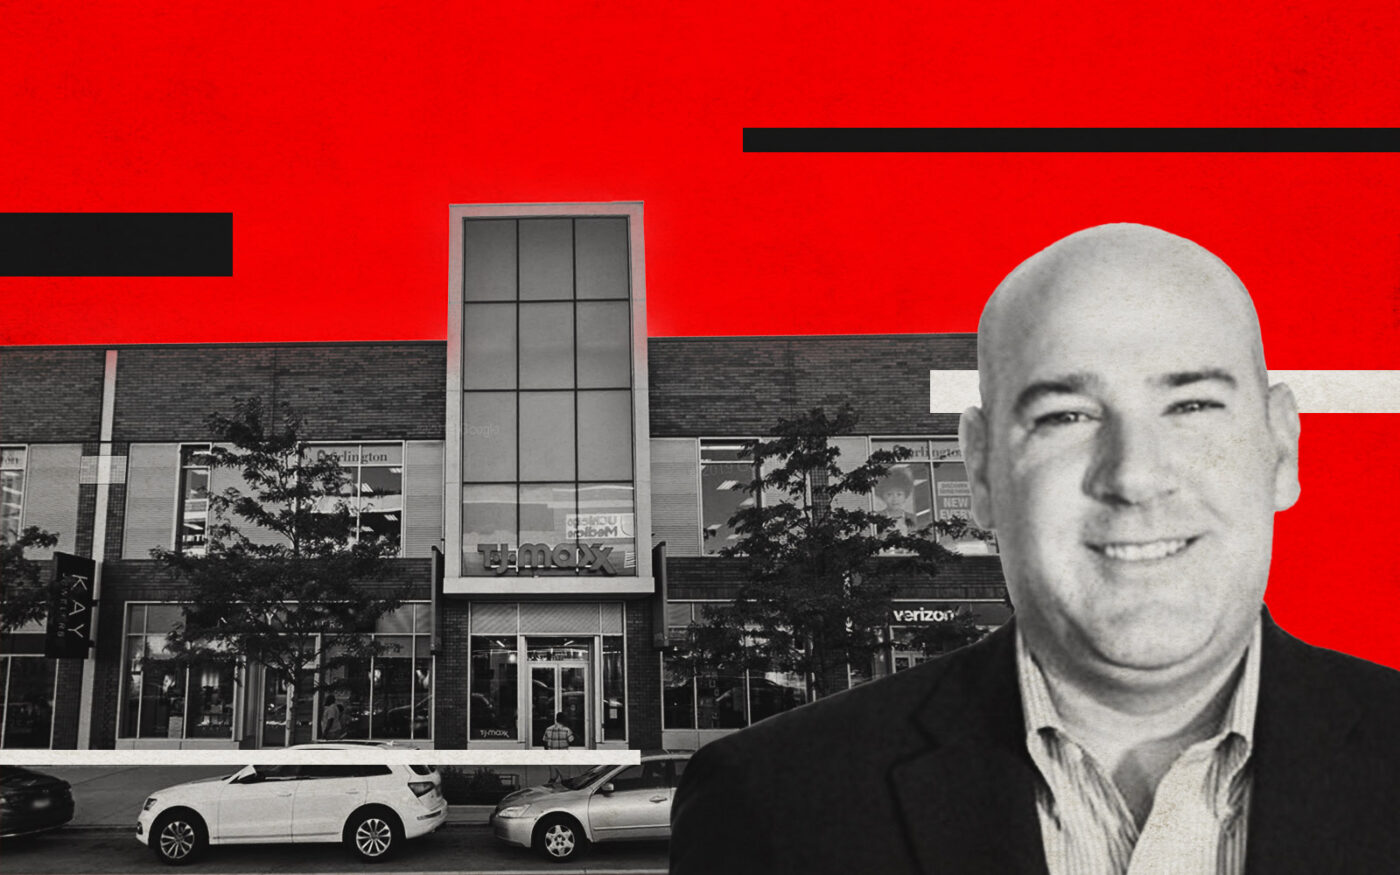 How to Survive the Retail Crisis: A Master Class from T.J. Maxx - WSJ